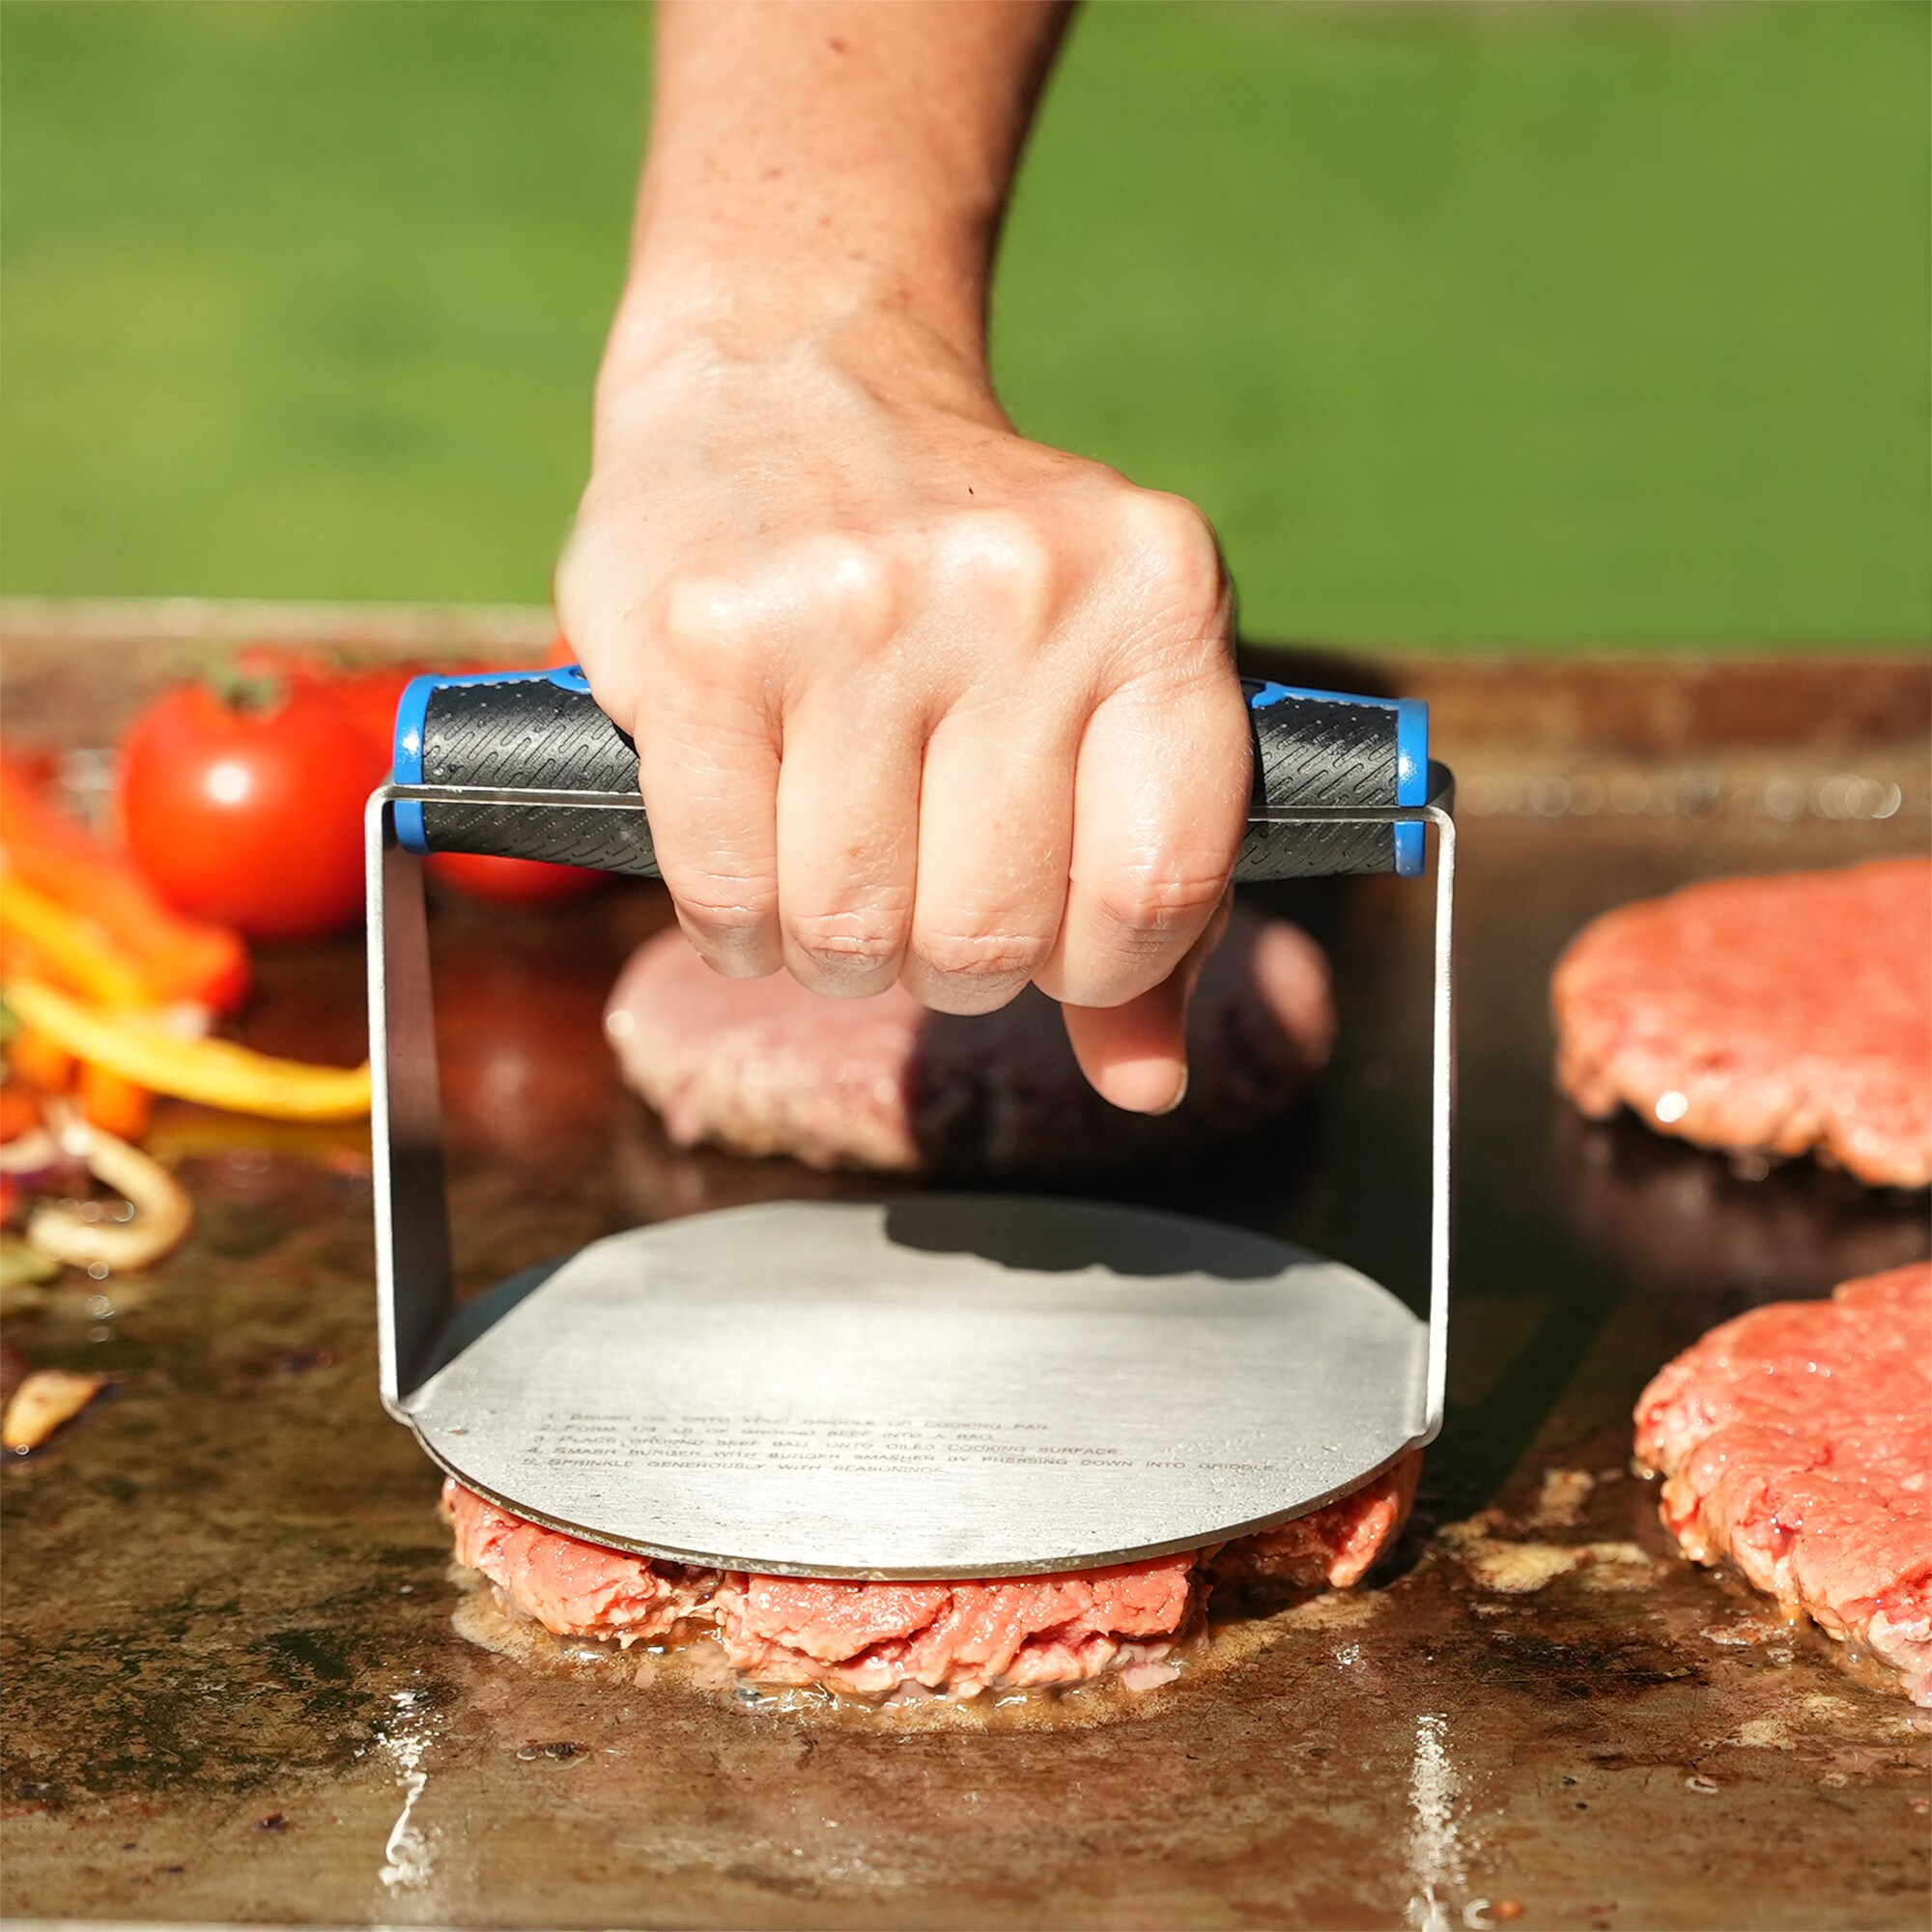 Tohuu Hamburger Patty Press Alloy Round Burger Smasher 3 in 1 Cooking Tool  Kitchen Barbecue Tool Smashed Meat Molds for Dinner beneficial 